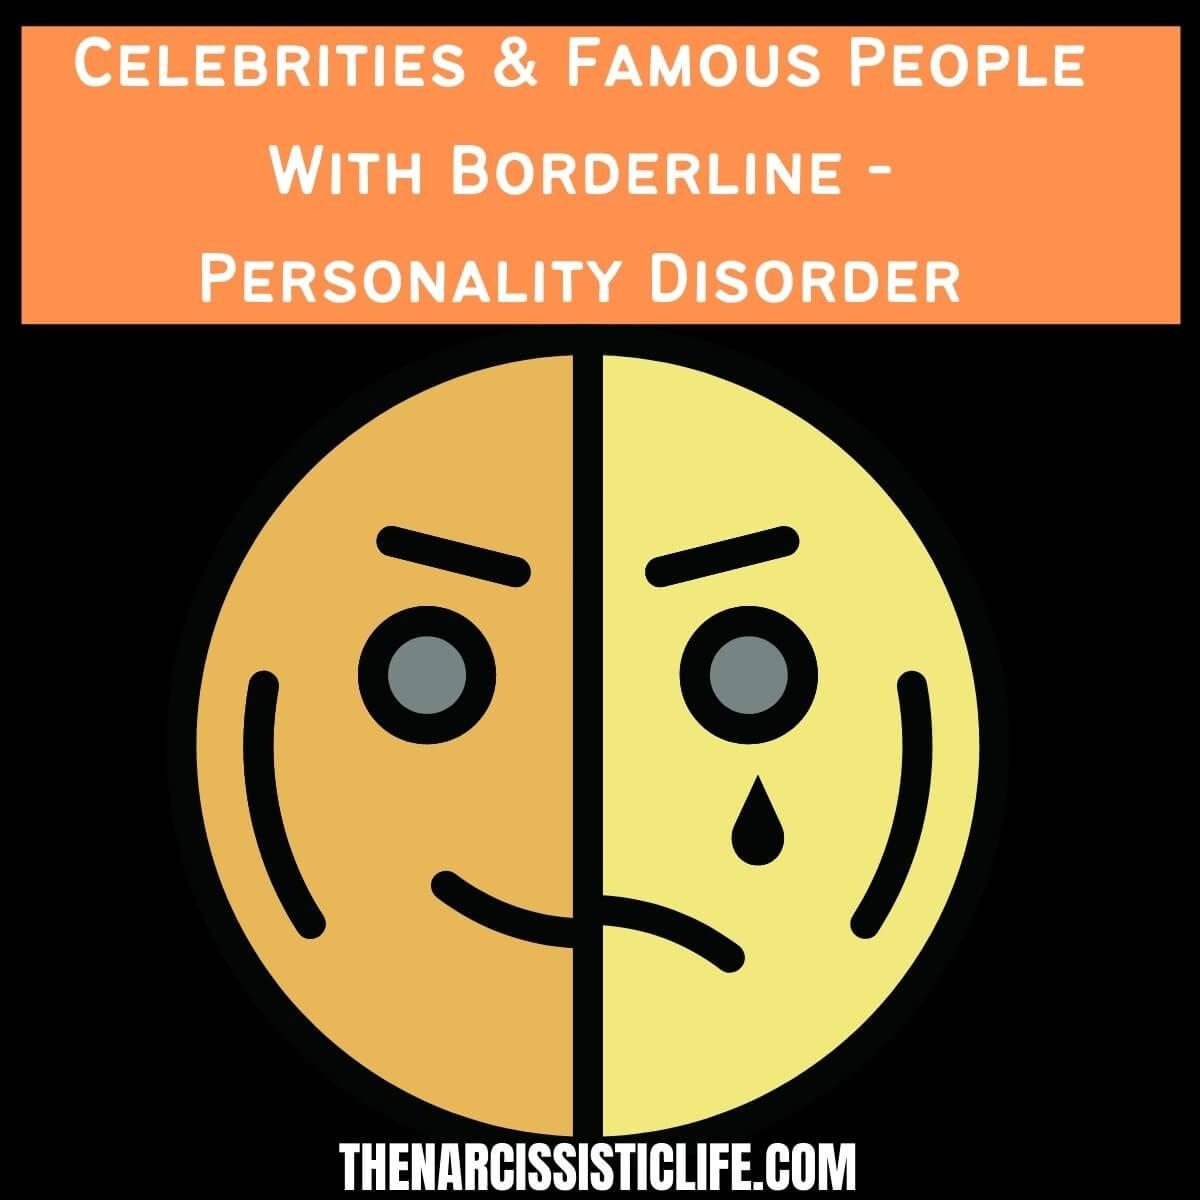 Celebrities & Famous People With Borderline Personality Disorder